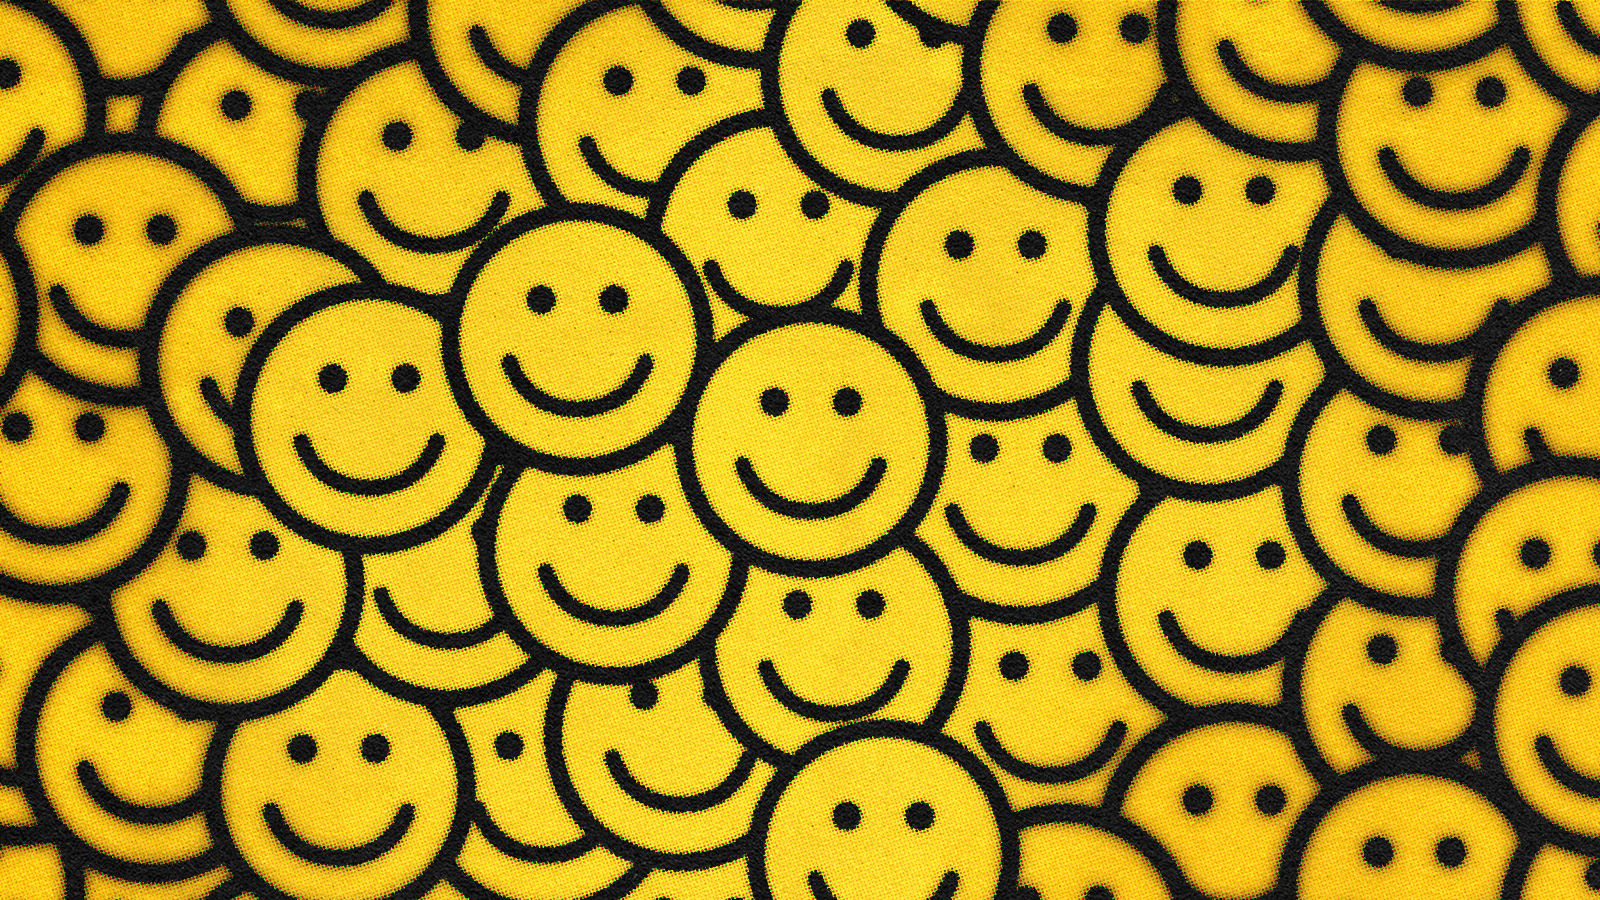 A pattern of numerous yellow smiley faces.